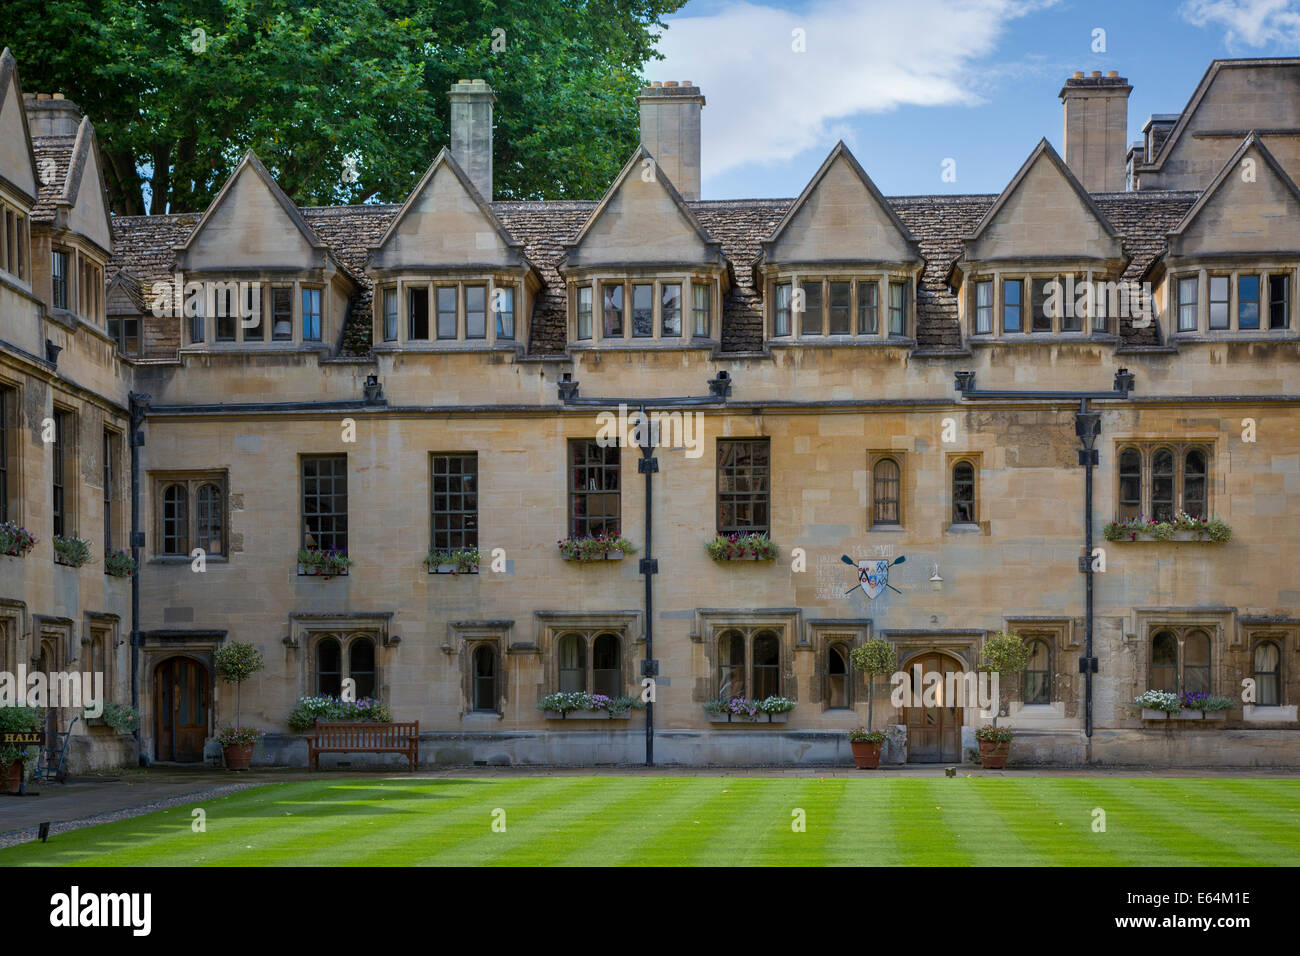 Courtyard of Brasenose College - founded in 1509, Oxford, Oxfordshire, England Stock Photo